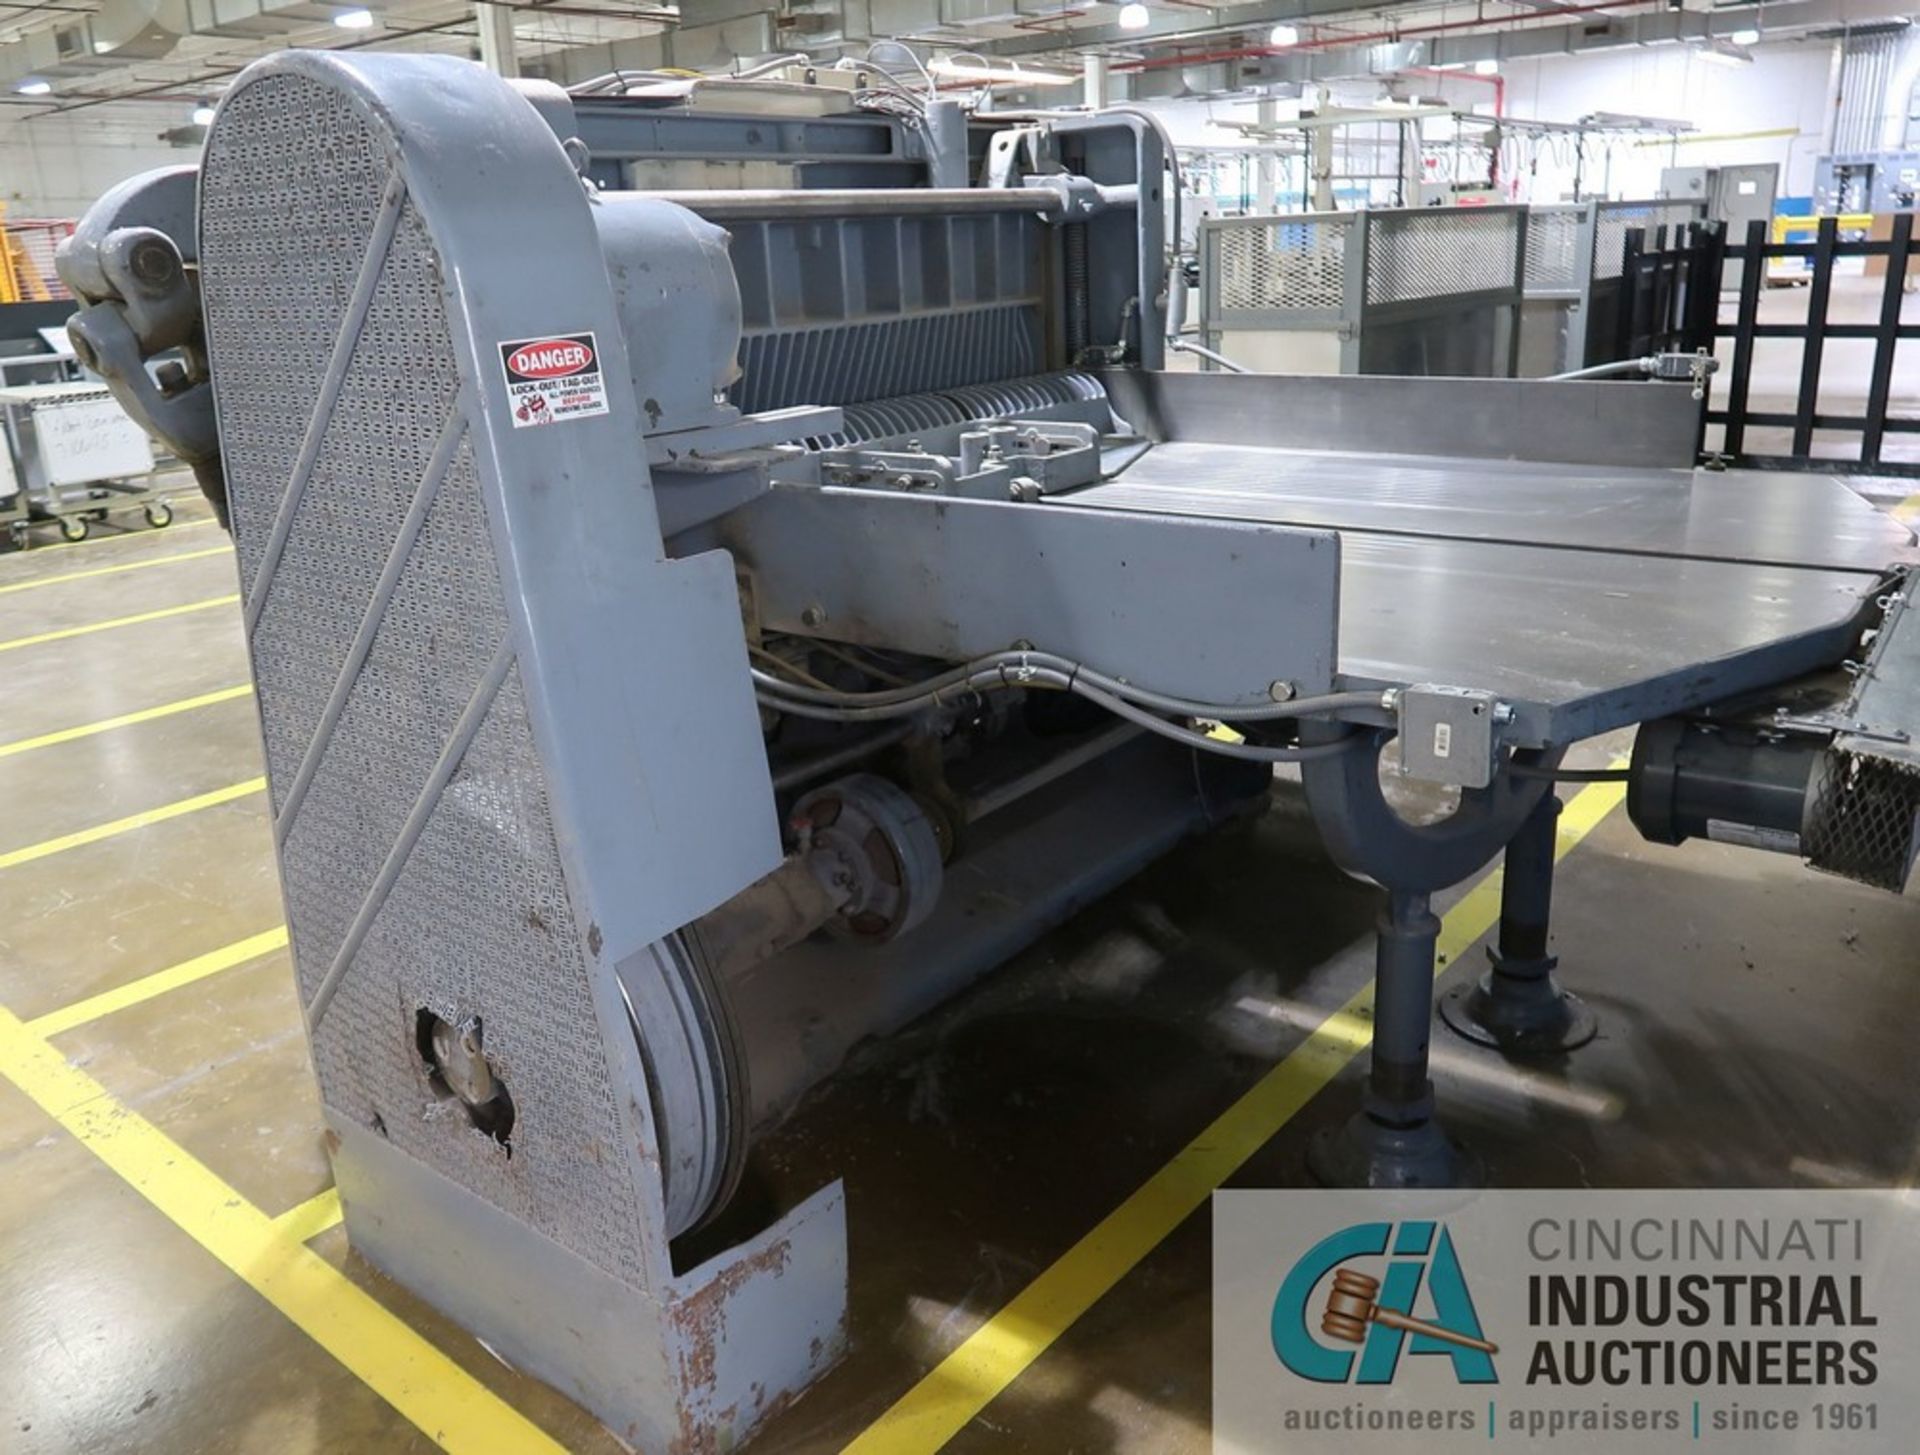 65" SEYBOLD MODEL CFF-P PAPER CUTTER; S/N CFF-524, WITH 92) SAFETY CLOSURES RAKE BACKSTOP, FOOT - Image 5 of 16